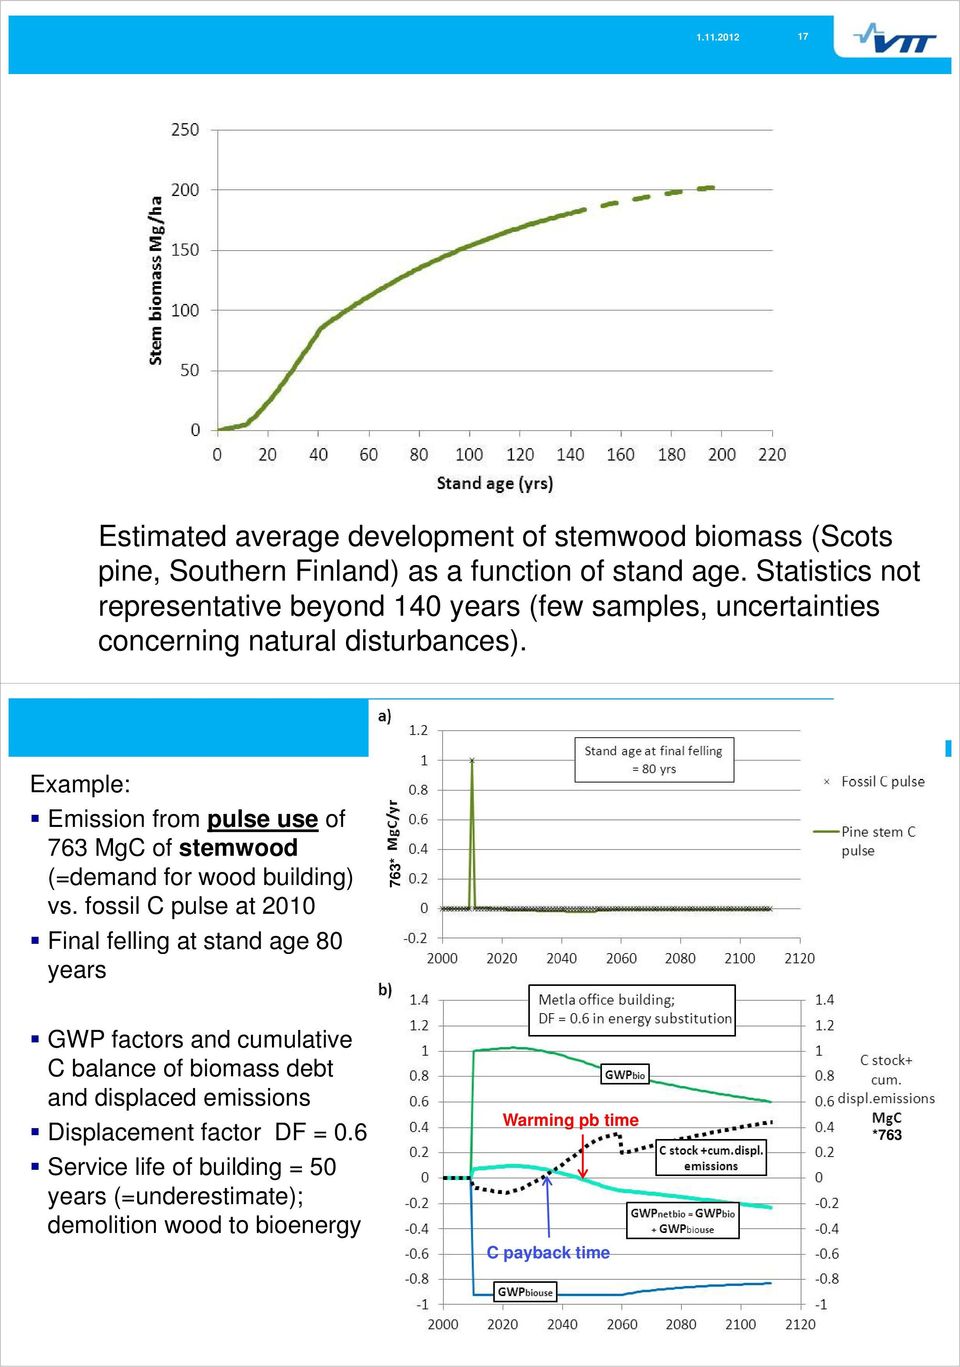 18 Example: Emission from pulse use of MgC of stemwood *763 (=demand for wood building) vs.